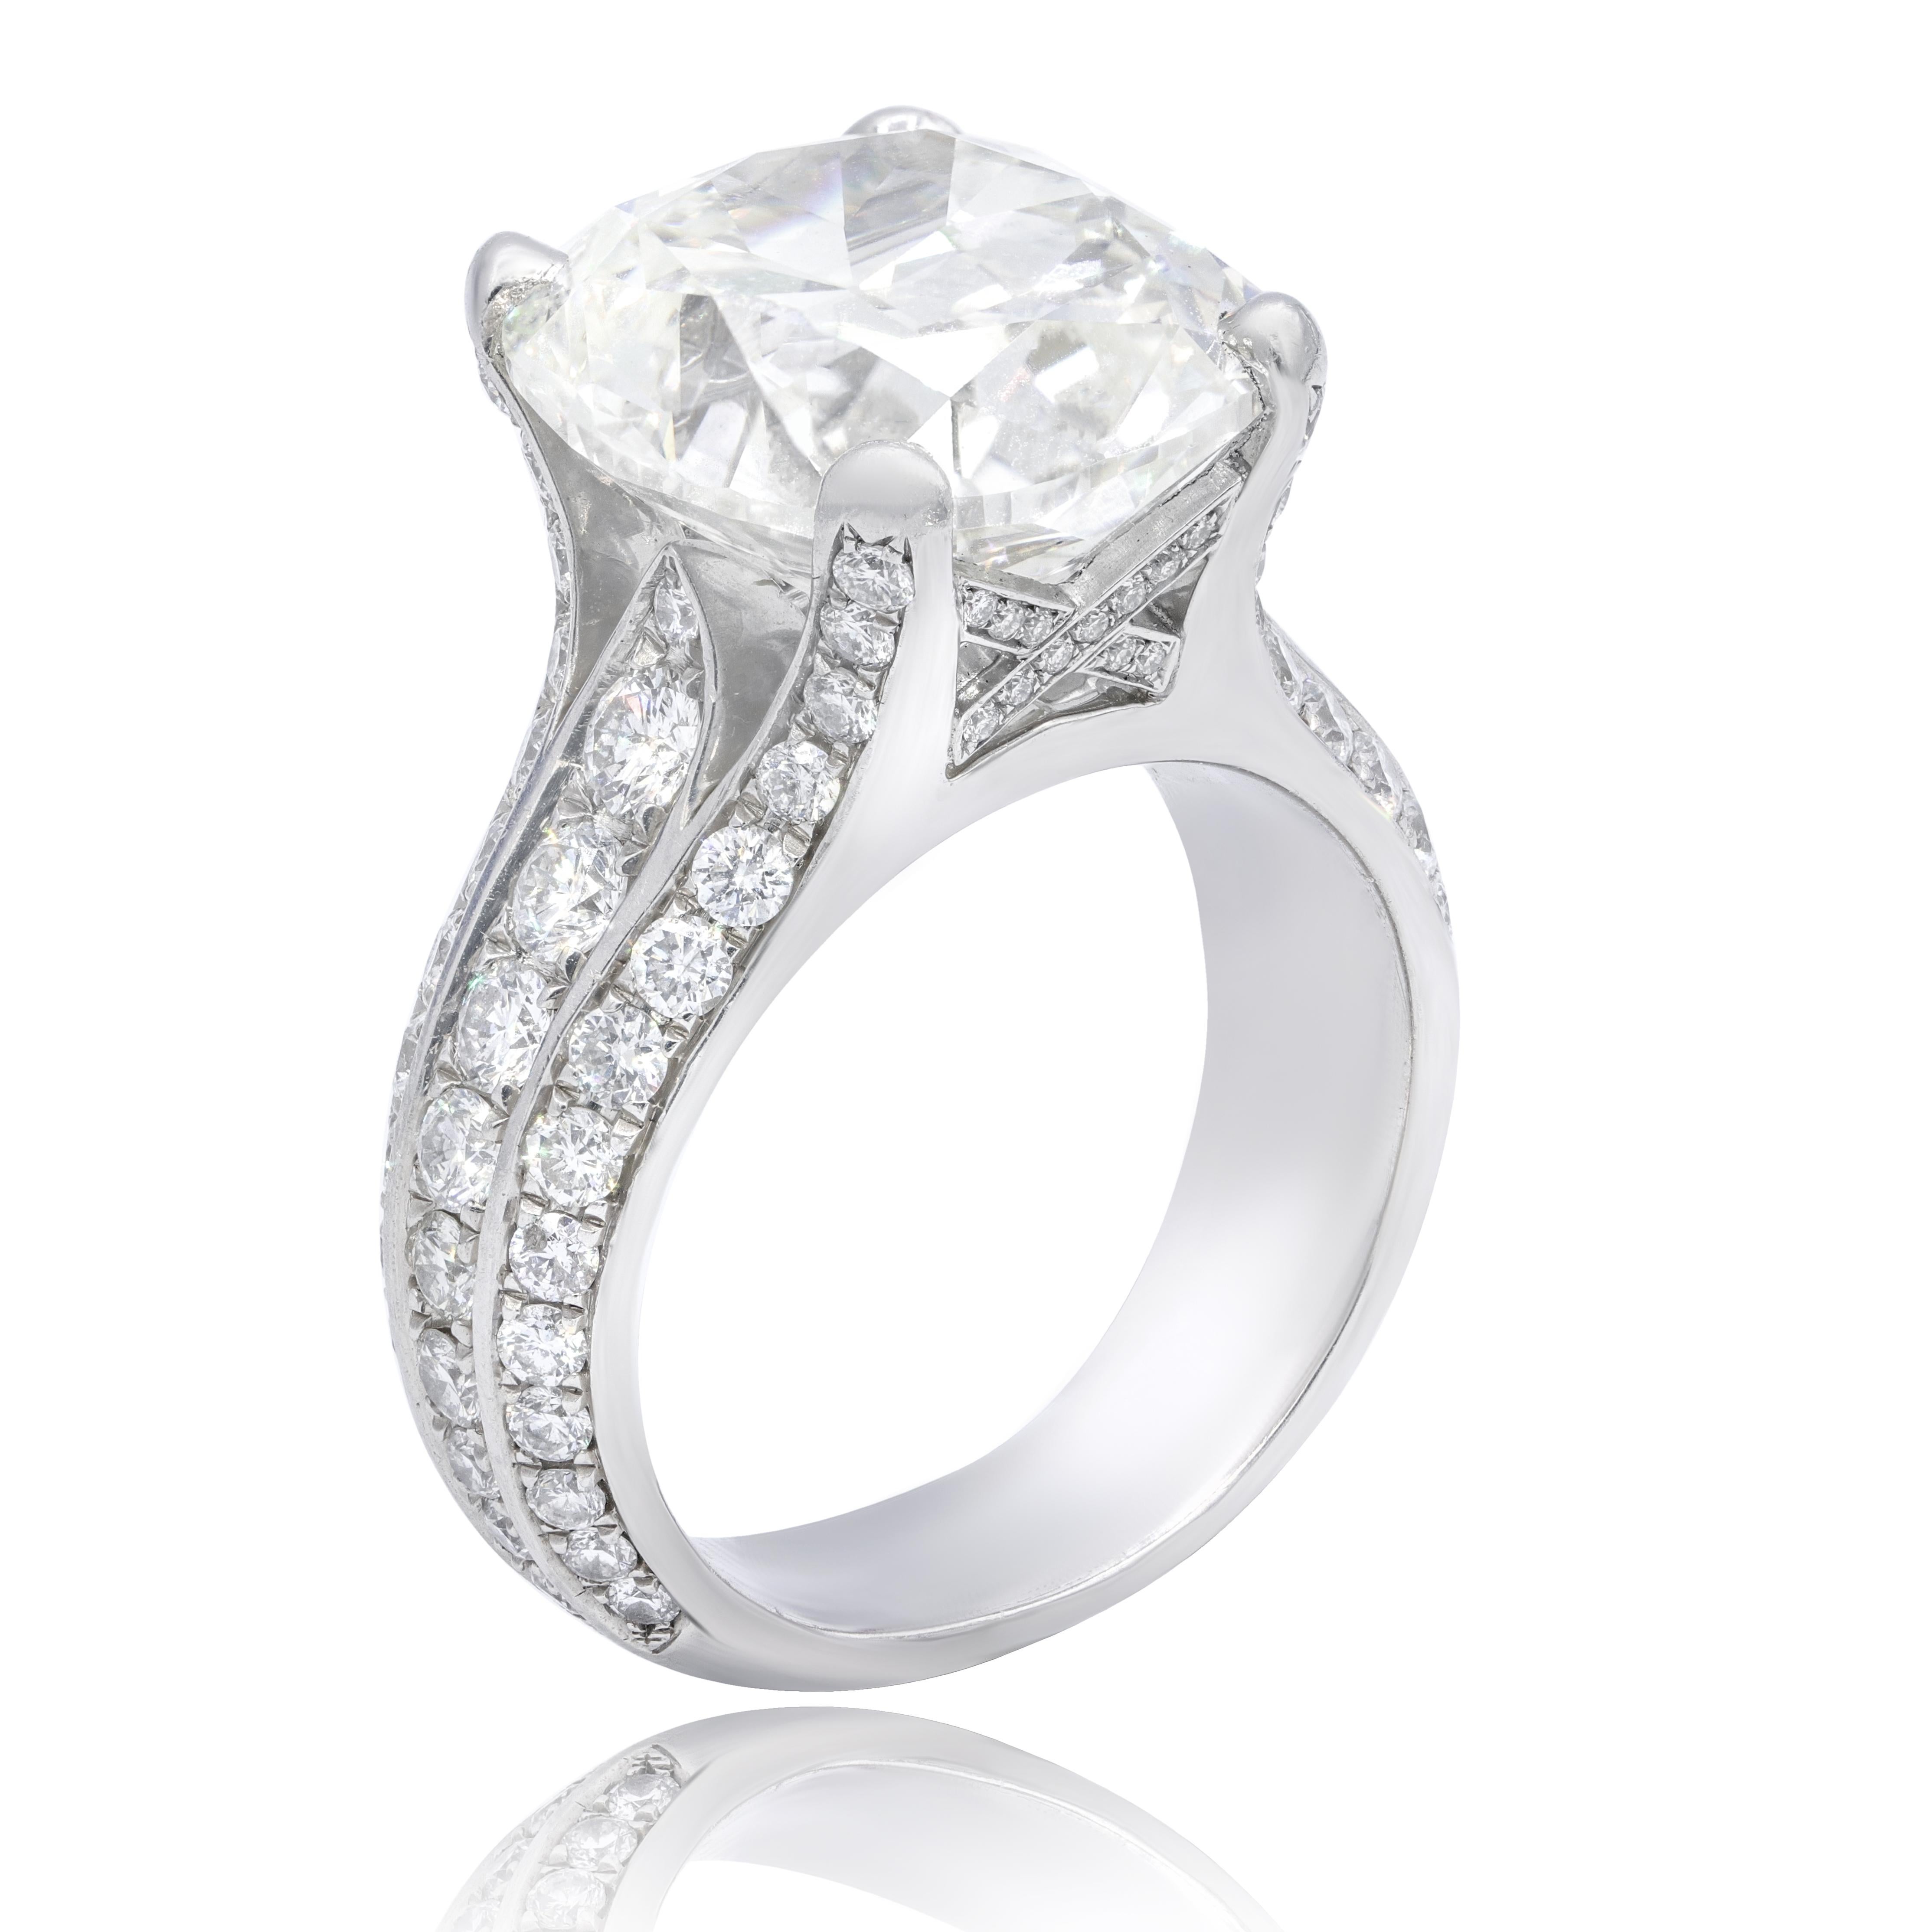 RADC521p/ this unique cushion diamond engagement ring showcases a magnificent 10.73-carat, GIA-certified (GIA 16394978) cushion cut diamond (k color; vs2 clarity) in the center and 2.50 ctw of dazzling round diamonds 
